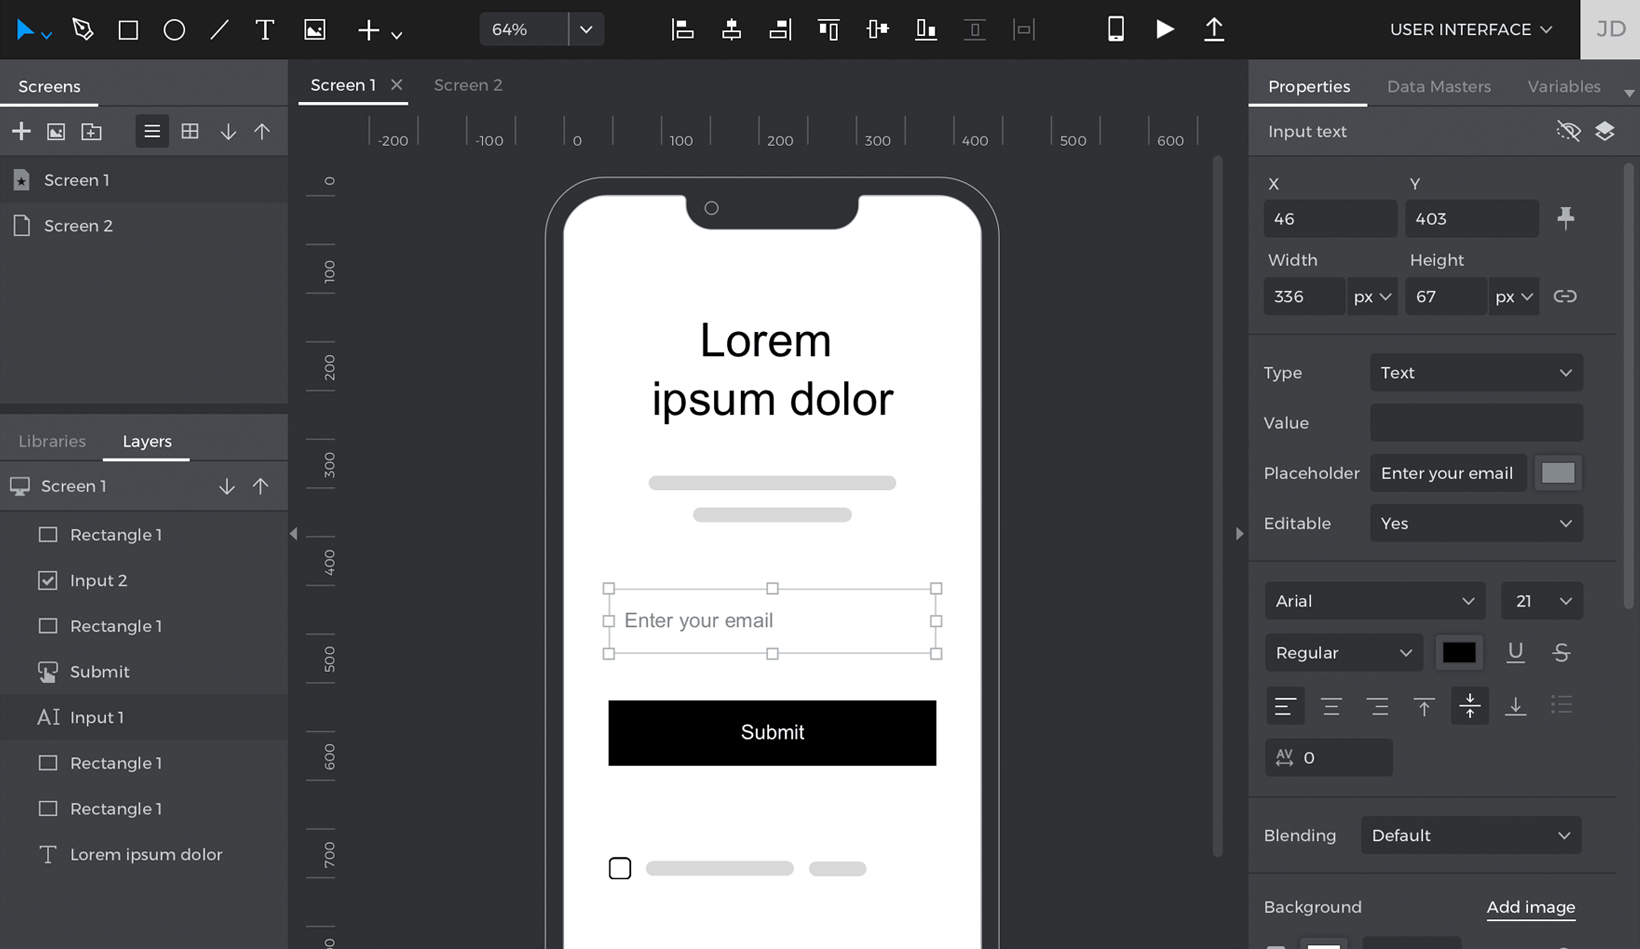 Input text field and a button creating a form